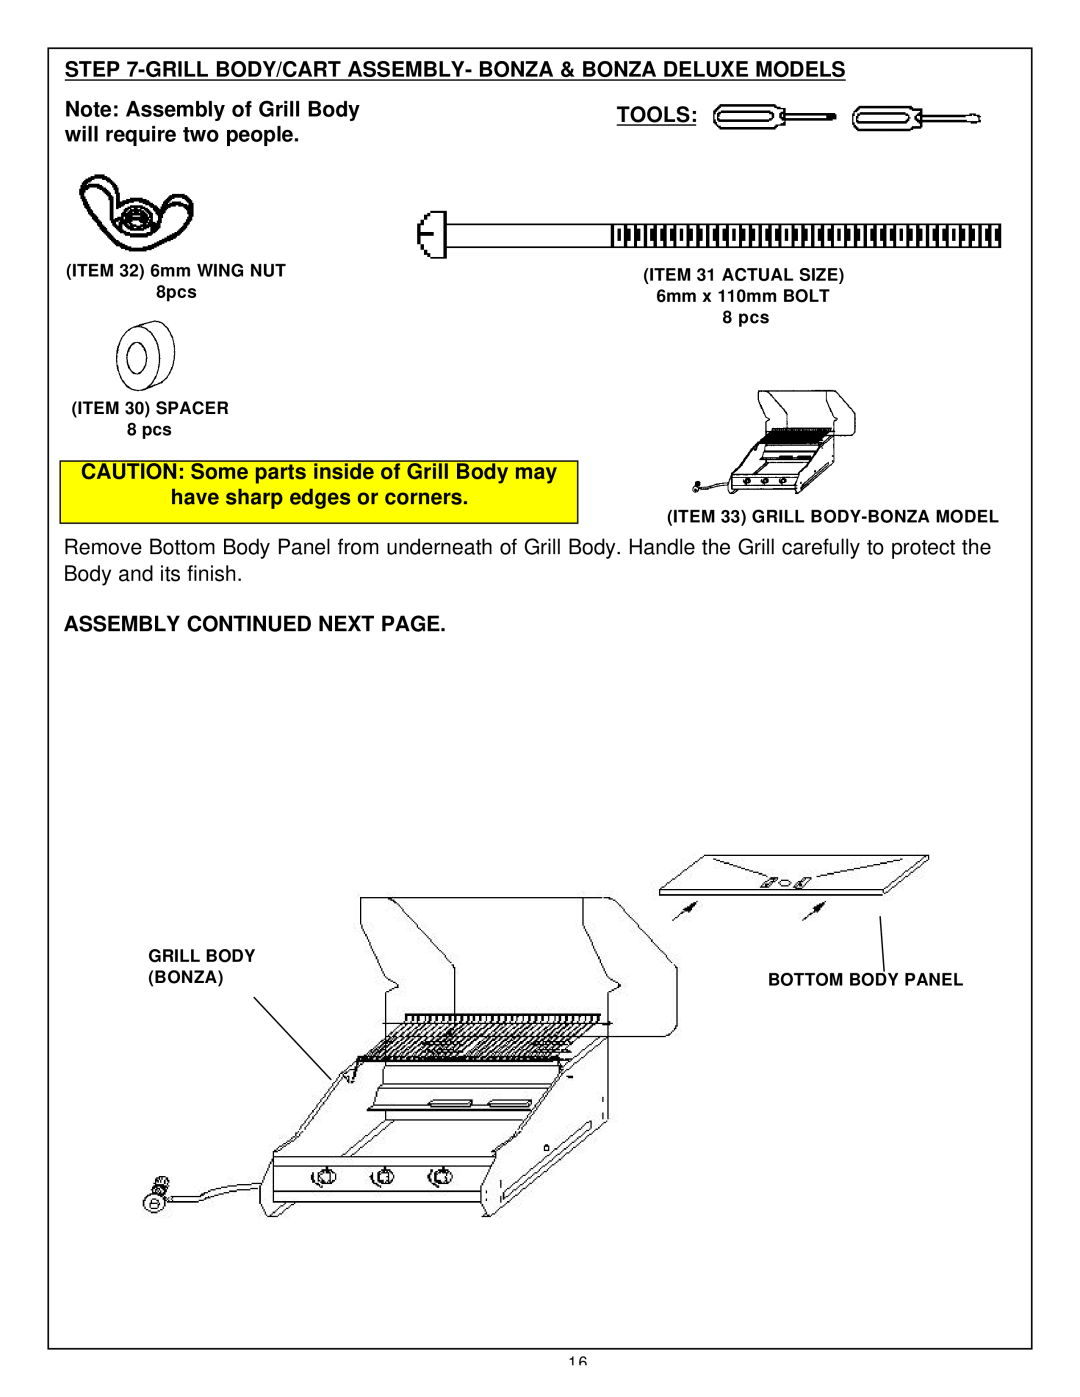 Aussie Kanga owner manual Grill Body/Cart Assembly- Bonza & Bonza Deluxe Models, Note Assembly of Grill Body, Tools 